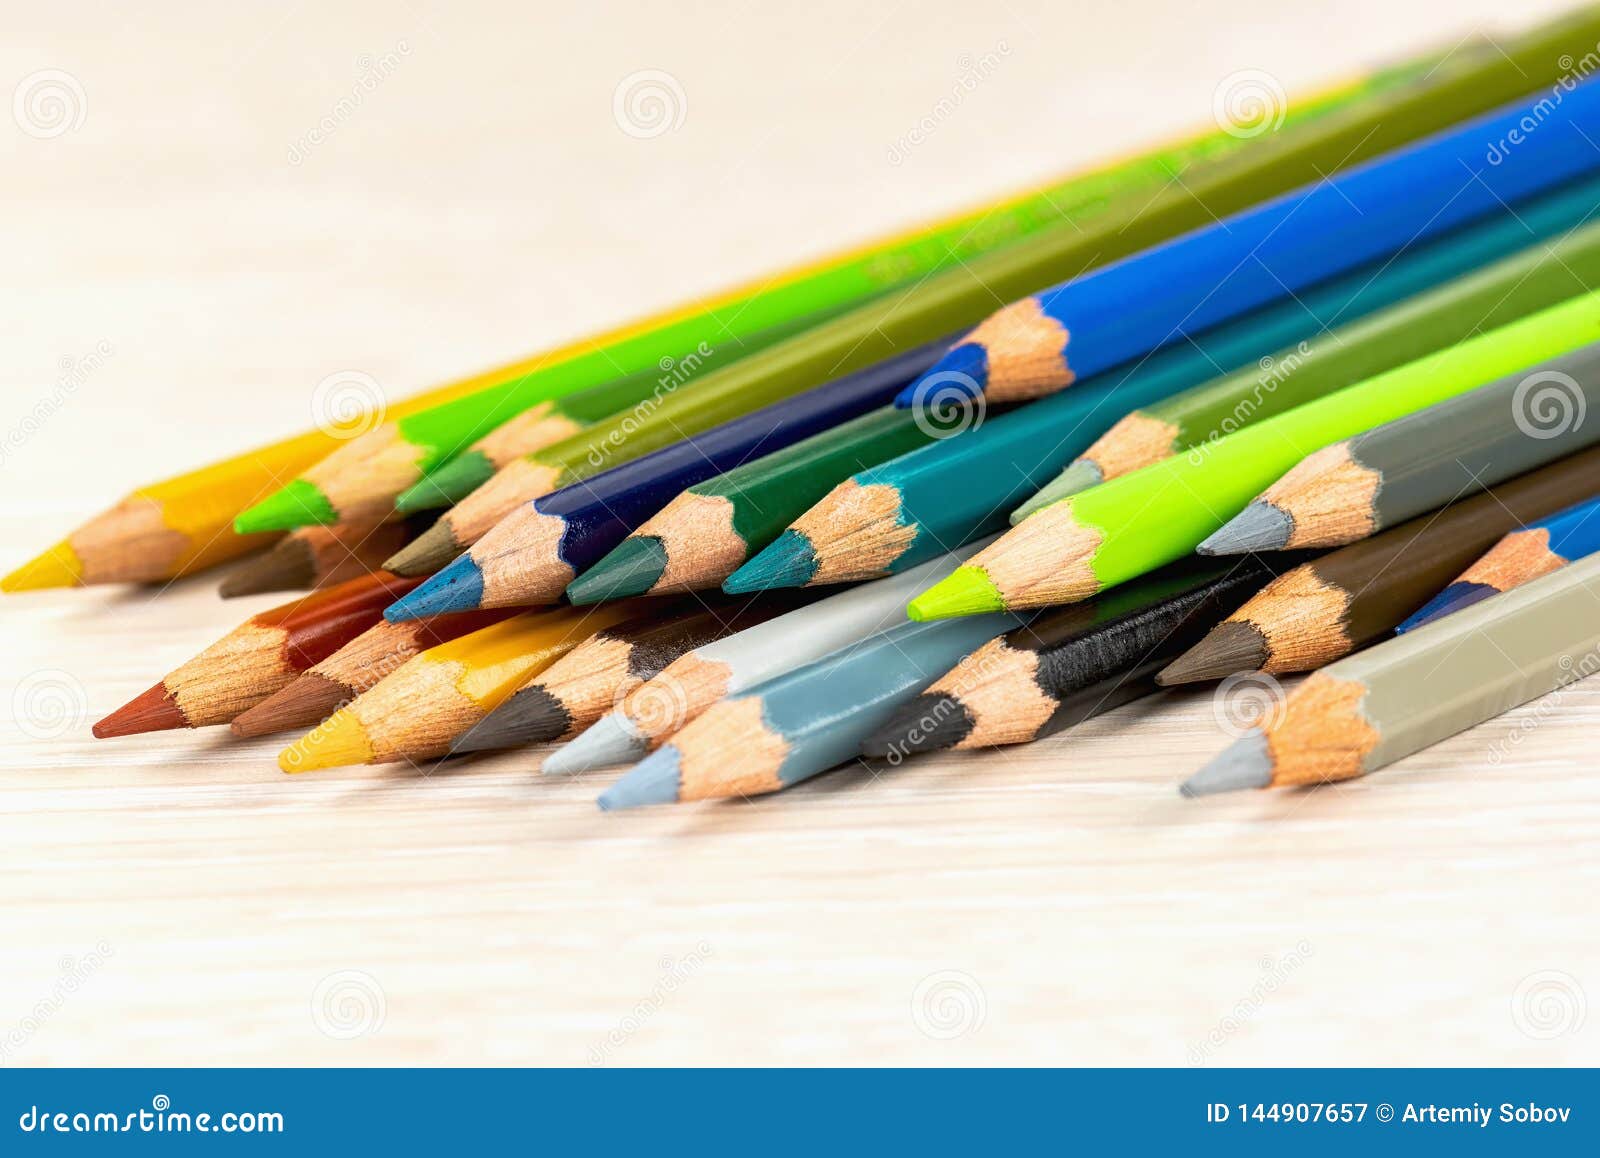 Set Of Colored Pencils. Colored Pencils For Drawing Different Colors